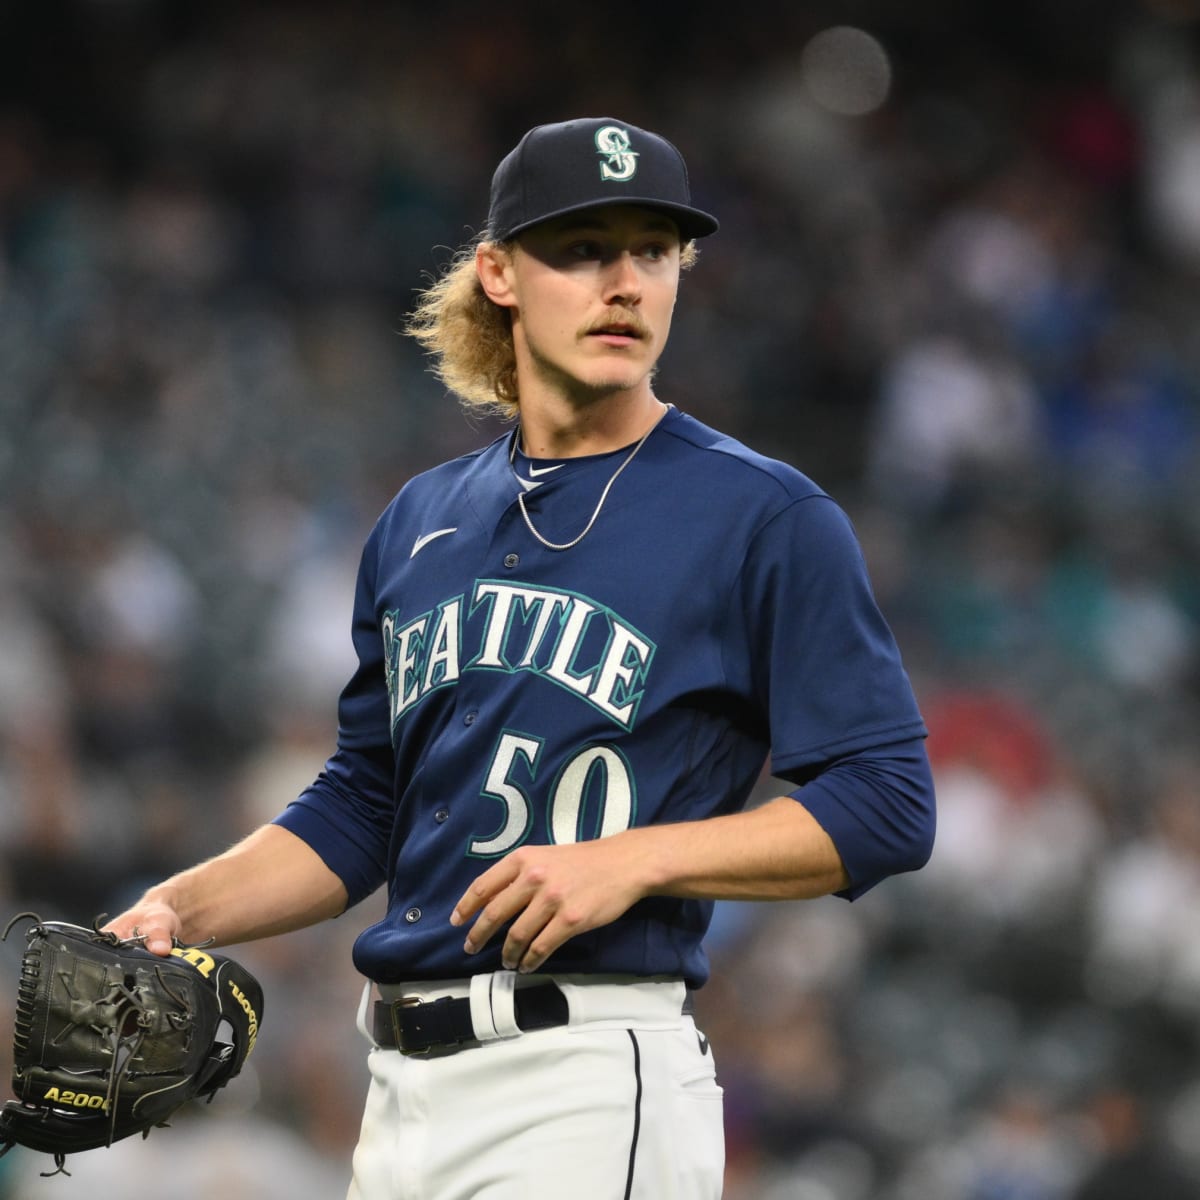 Rookie Bryce Miller sharp in his return as Mariners shut out Tigers, Mariners